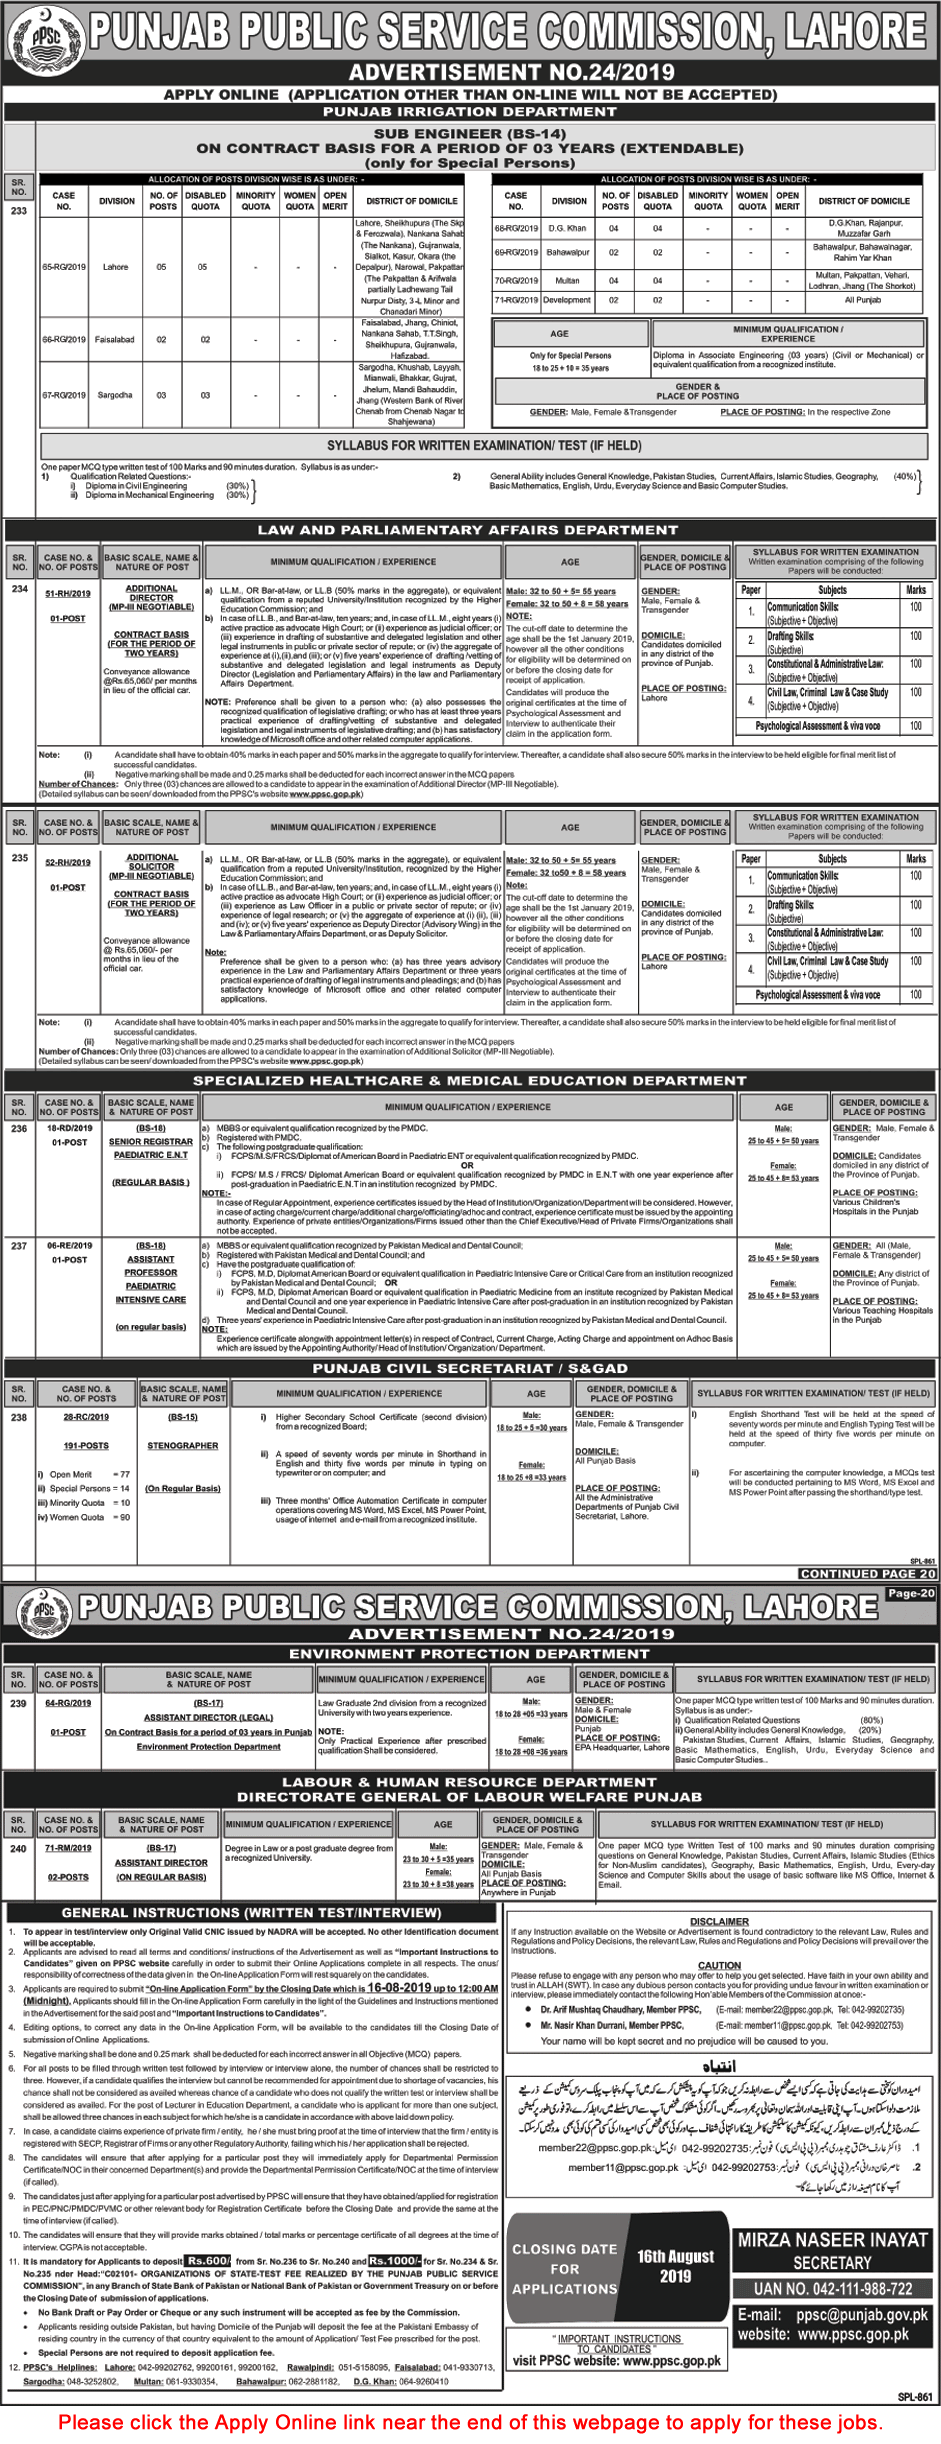 PPSC Jobs July 2019 Apply Online Consolidated Advertisement No 24/2019 Latest